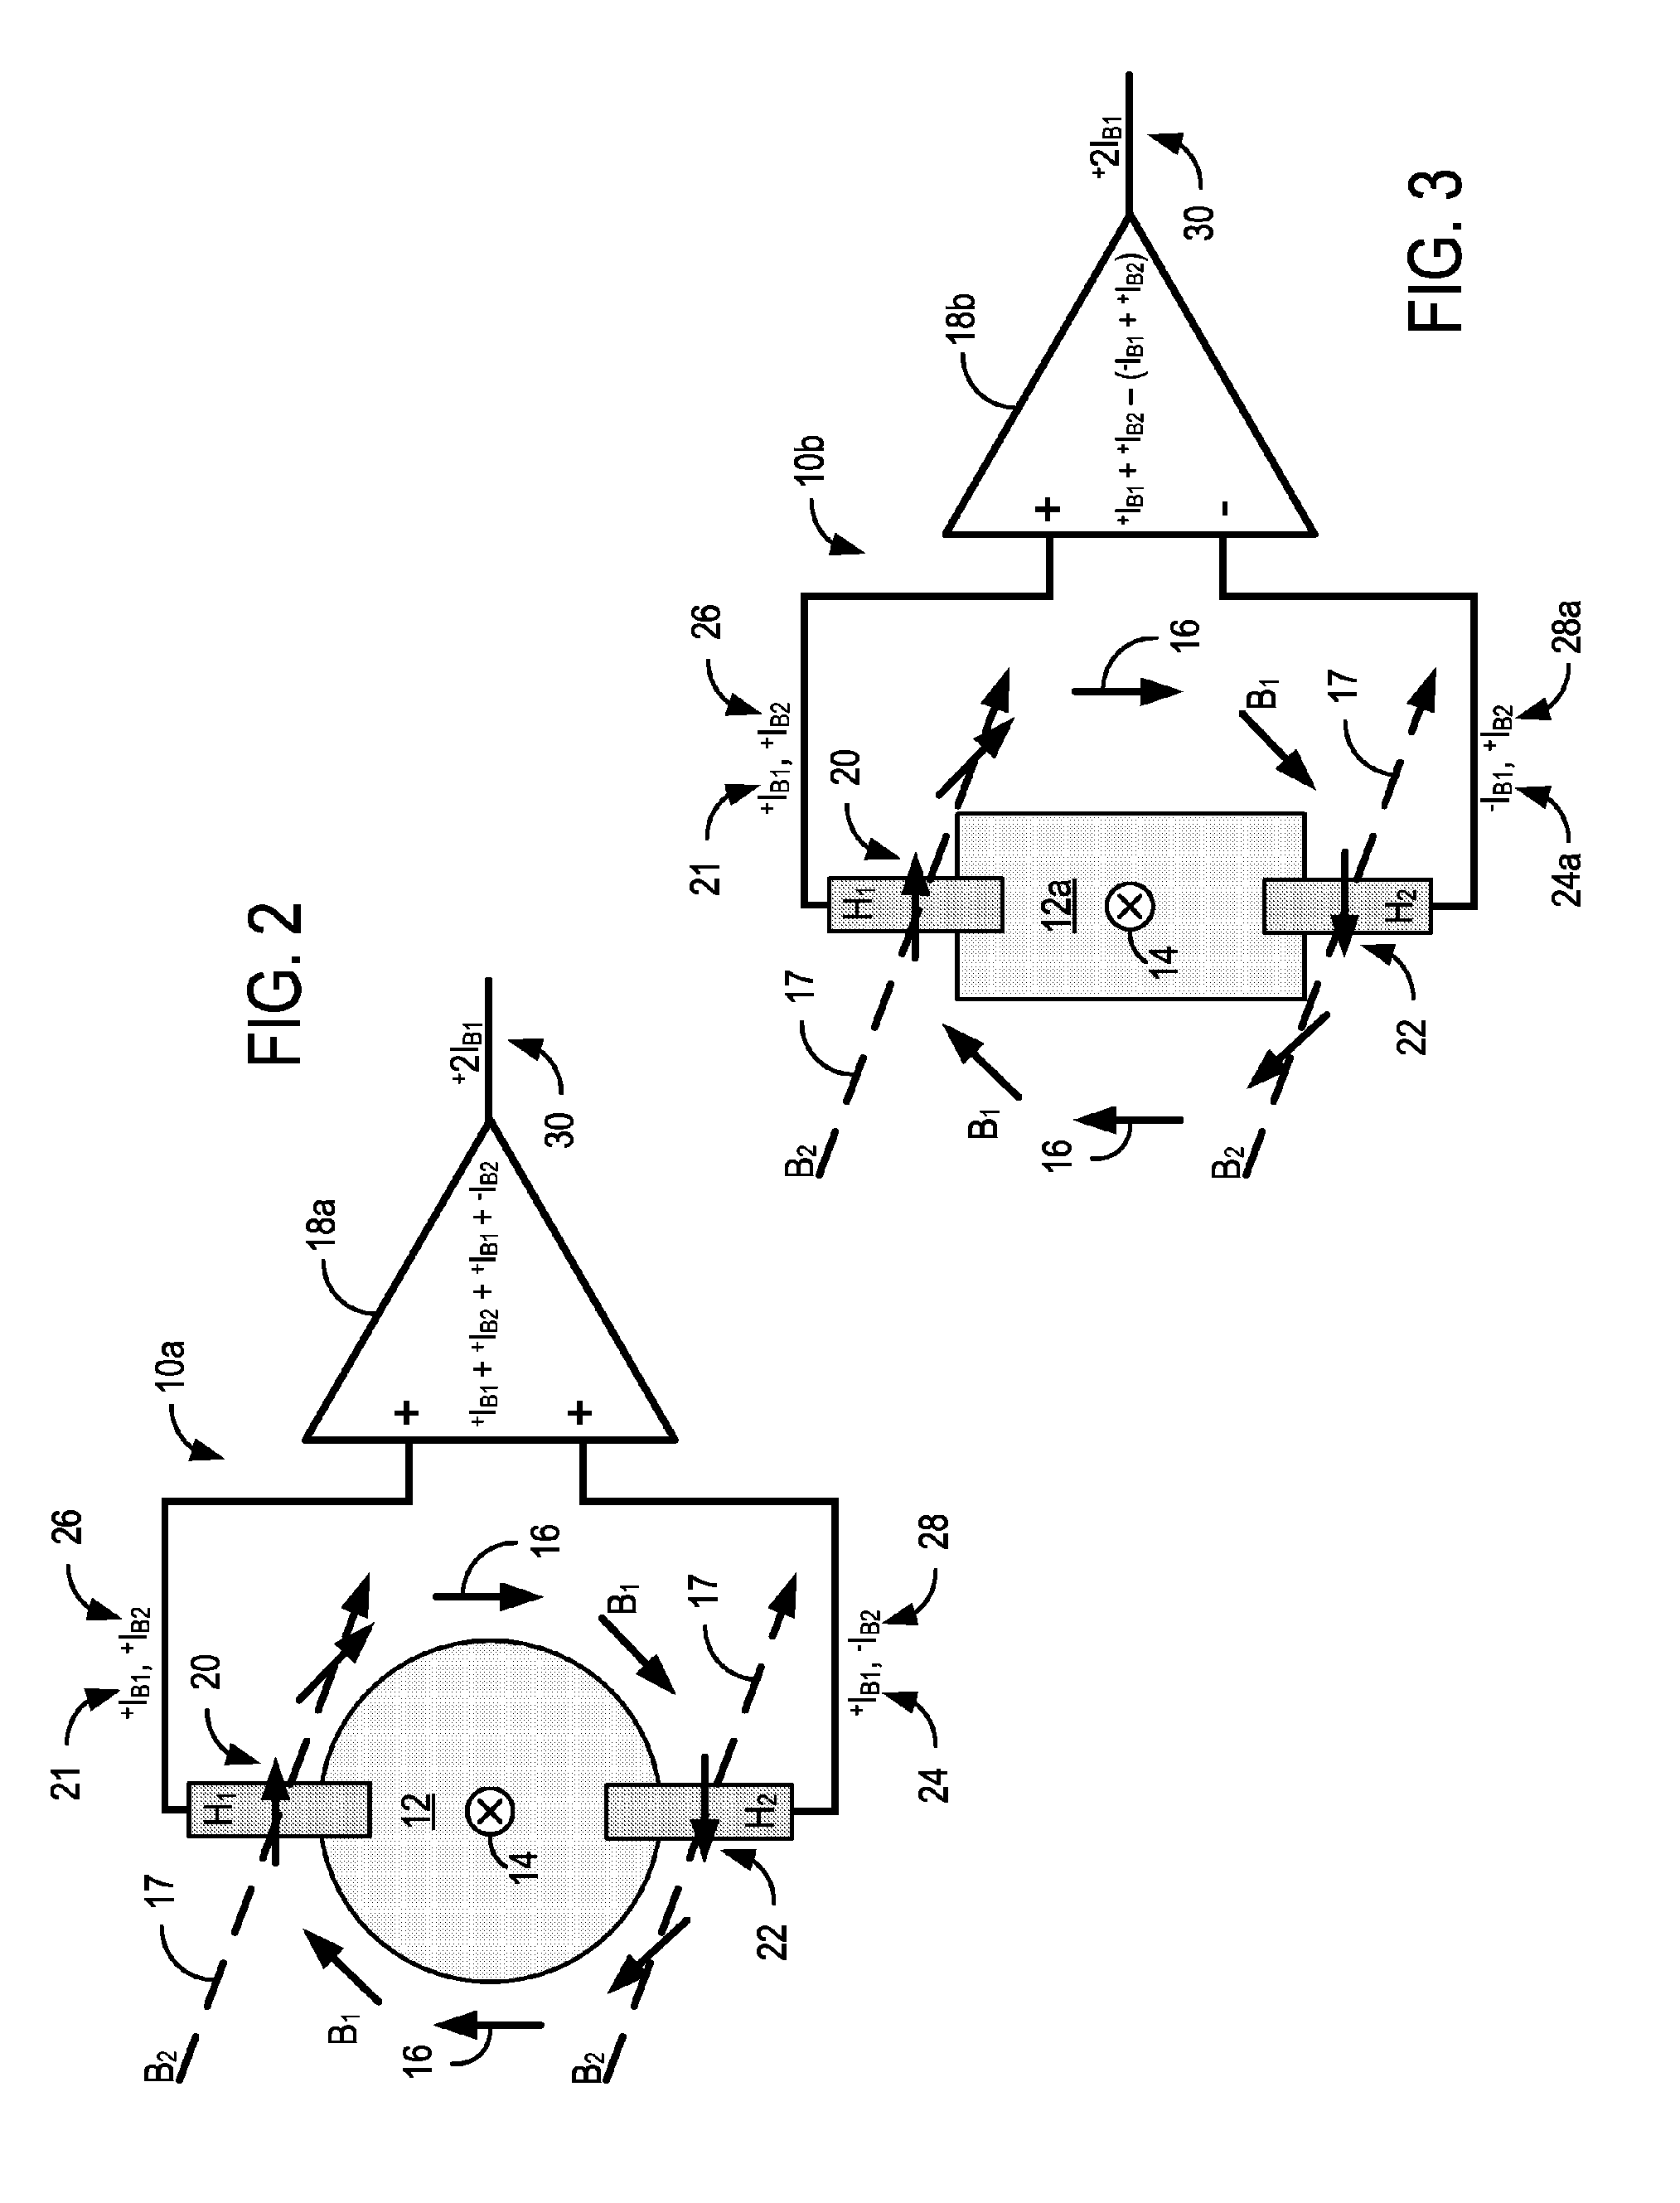 Integrated Anti-differential current sensing system